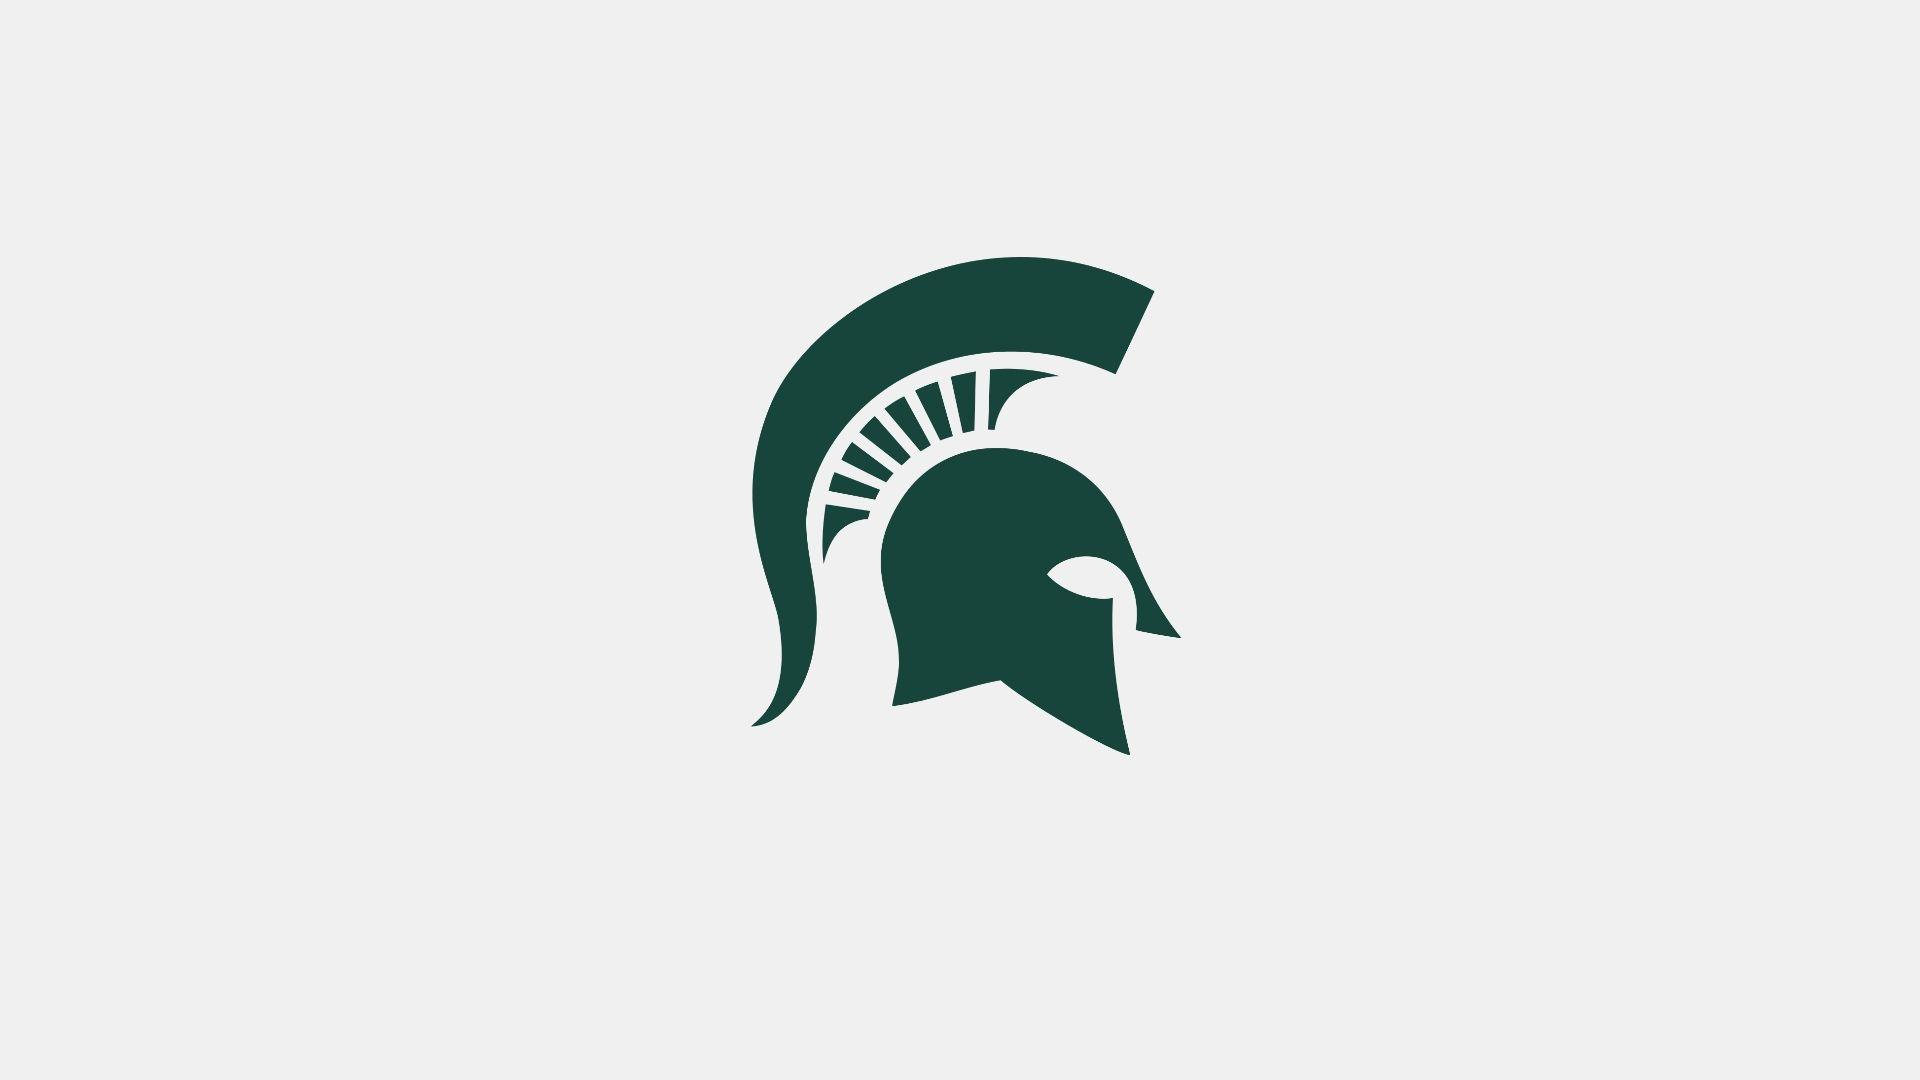 Michigan state spartans logo wallpapers